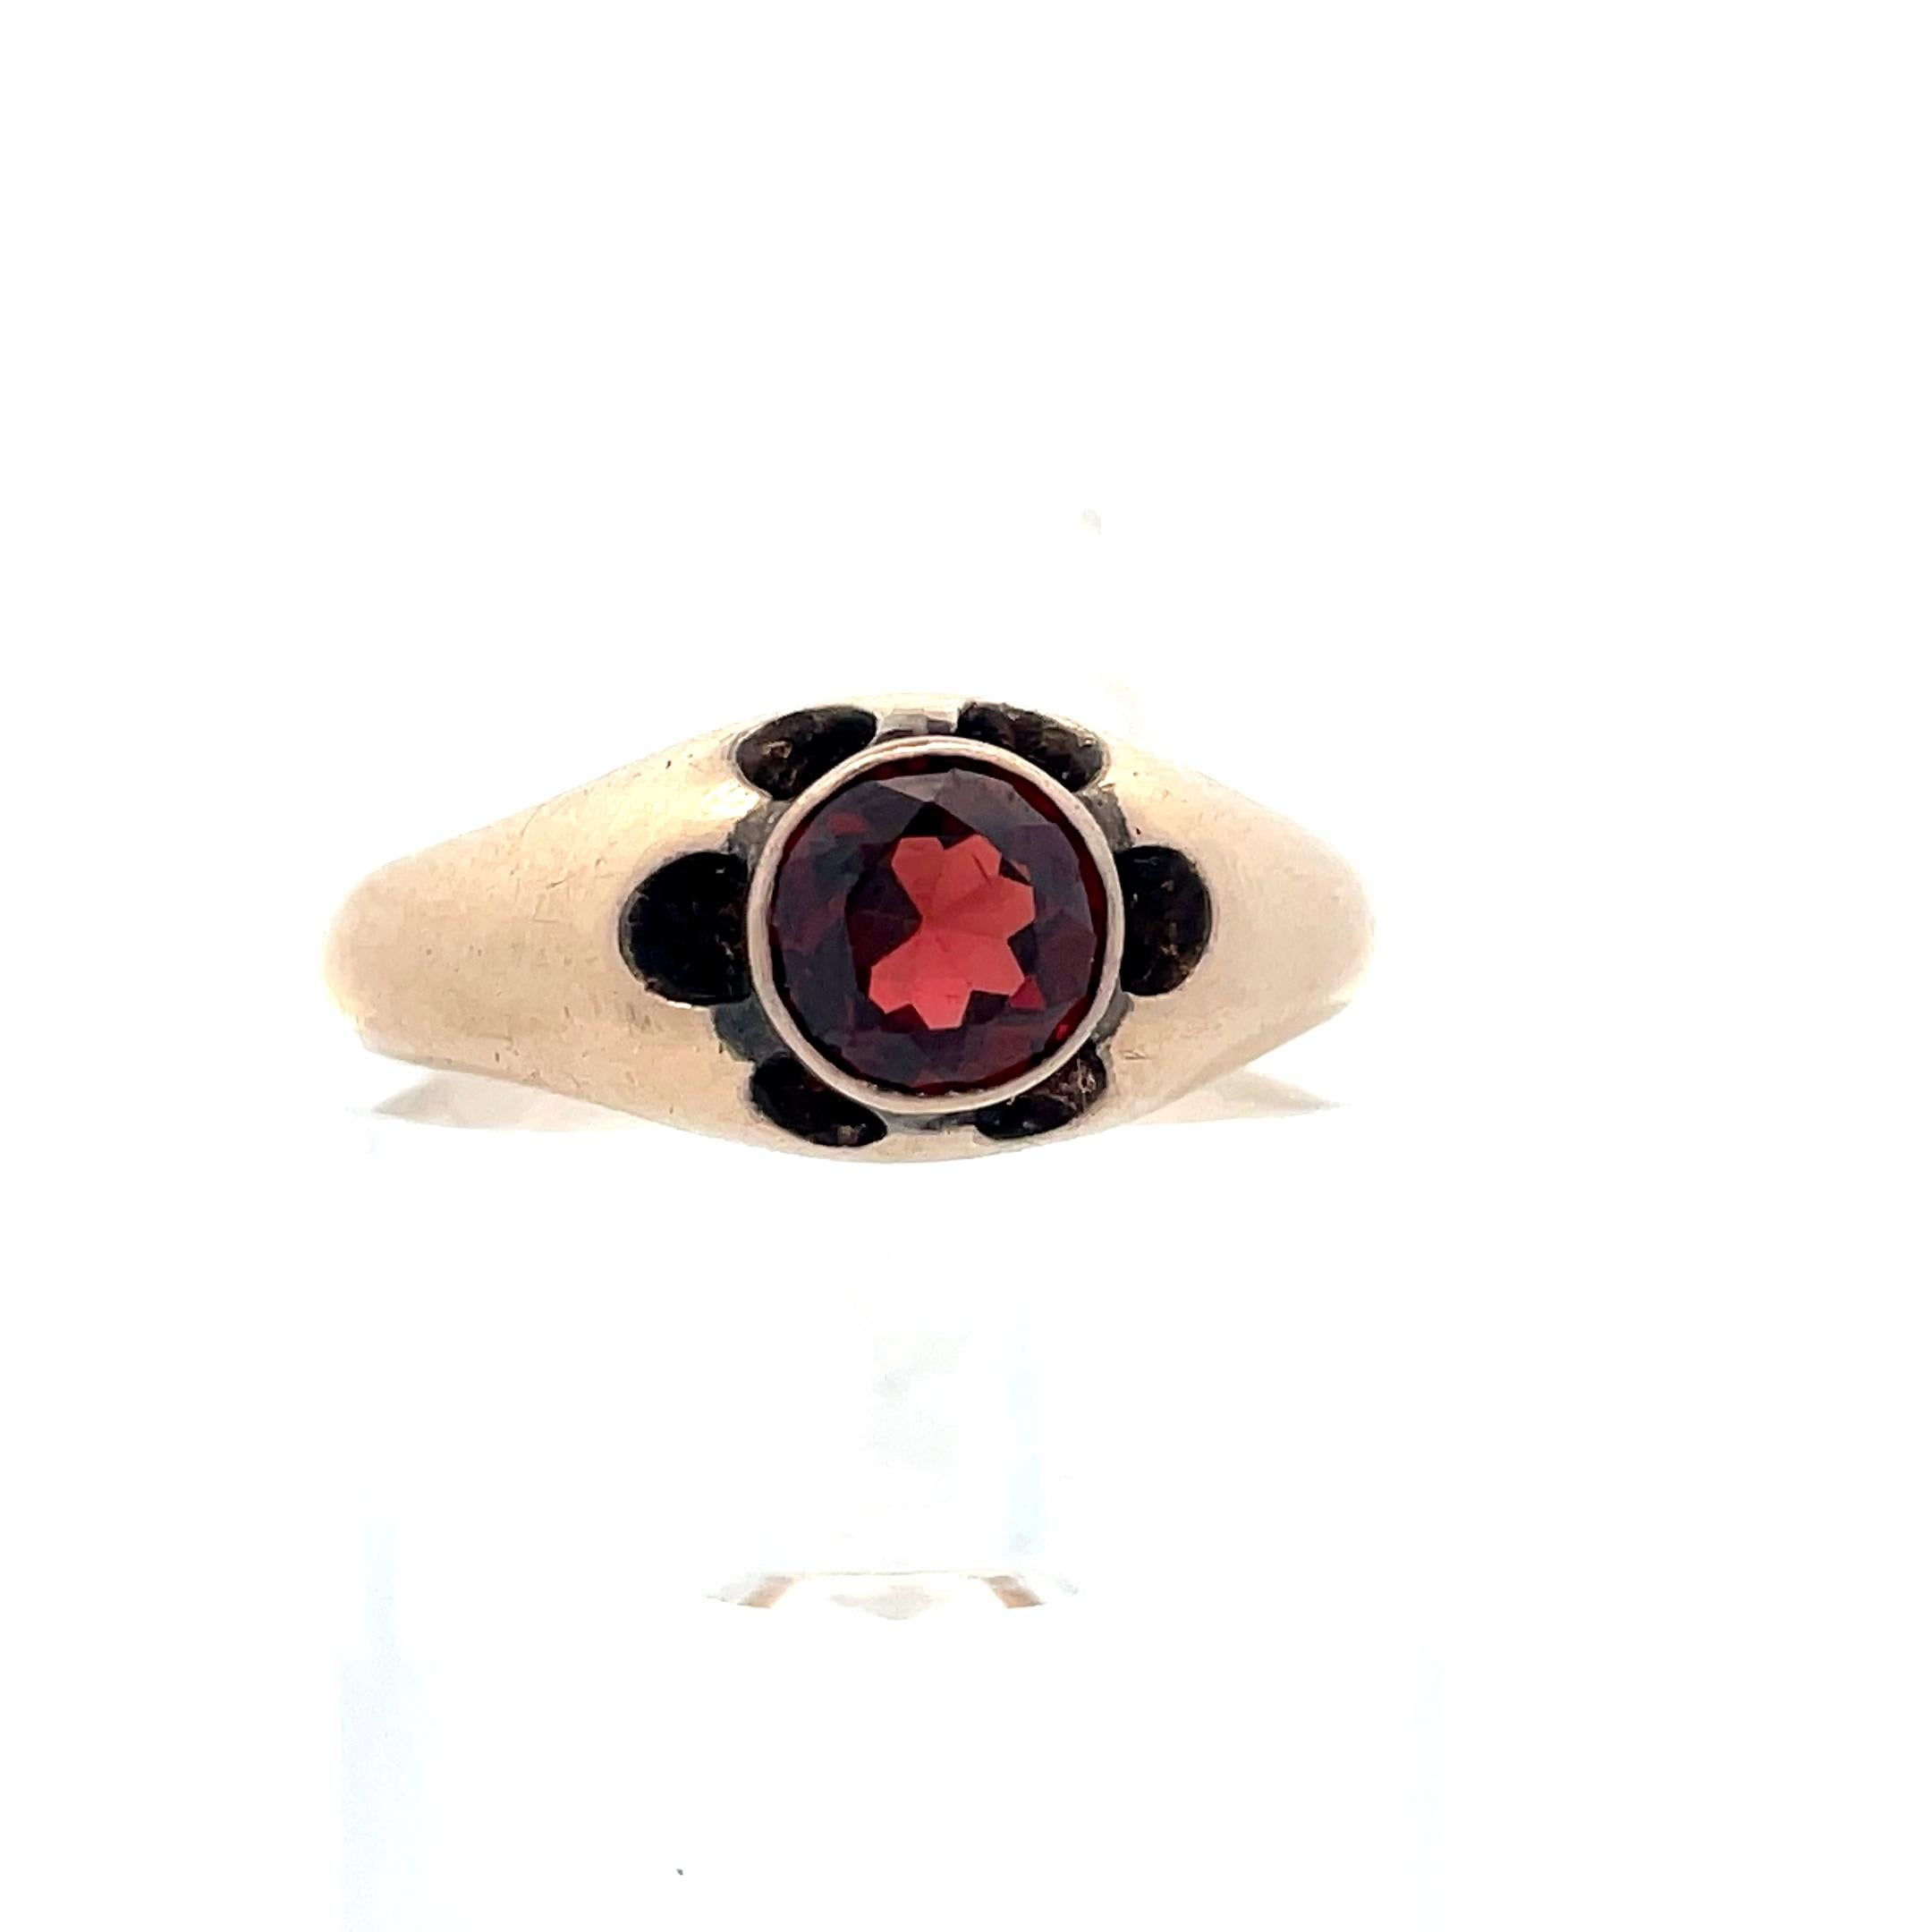 - 14K Yellow Gold 
- 1.35 ct Garnet 
- 1890 Victorian 
- Size 10.5 
- 5.67 grams 

This is a gorgeous garnet ring madei n 14k yellow gold from the 1890 Victorian period. The body if the ring all 14k yellow gold and features a 1.35 ct round cut